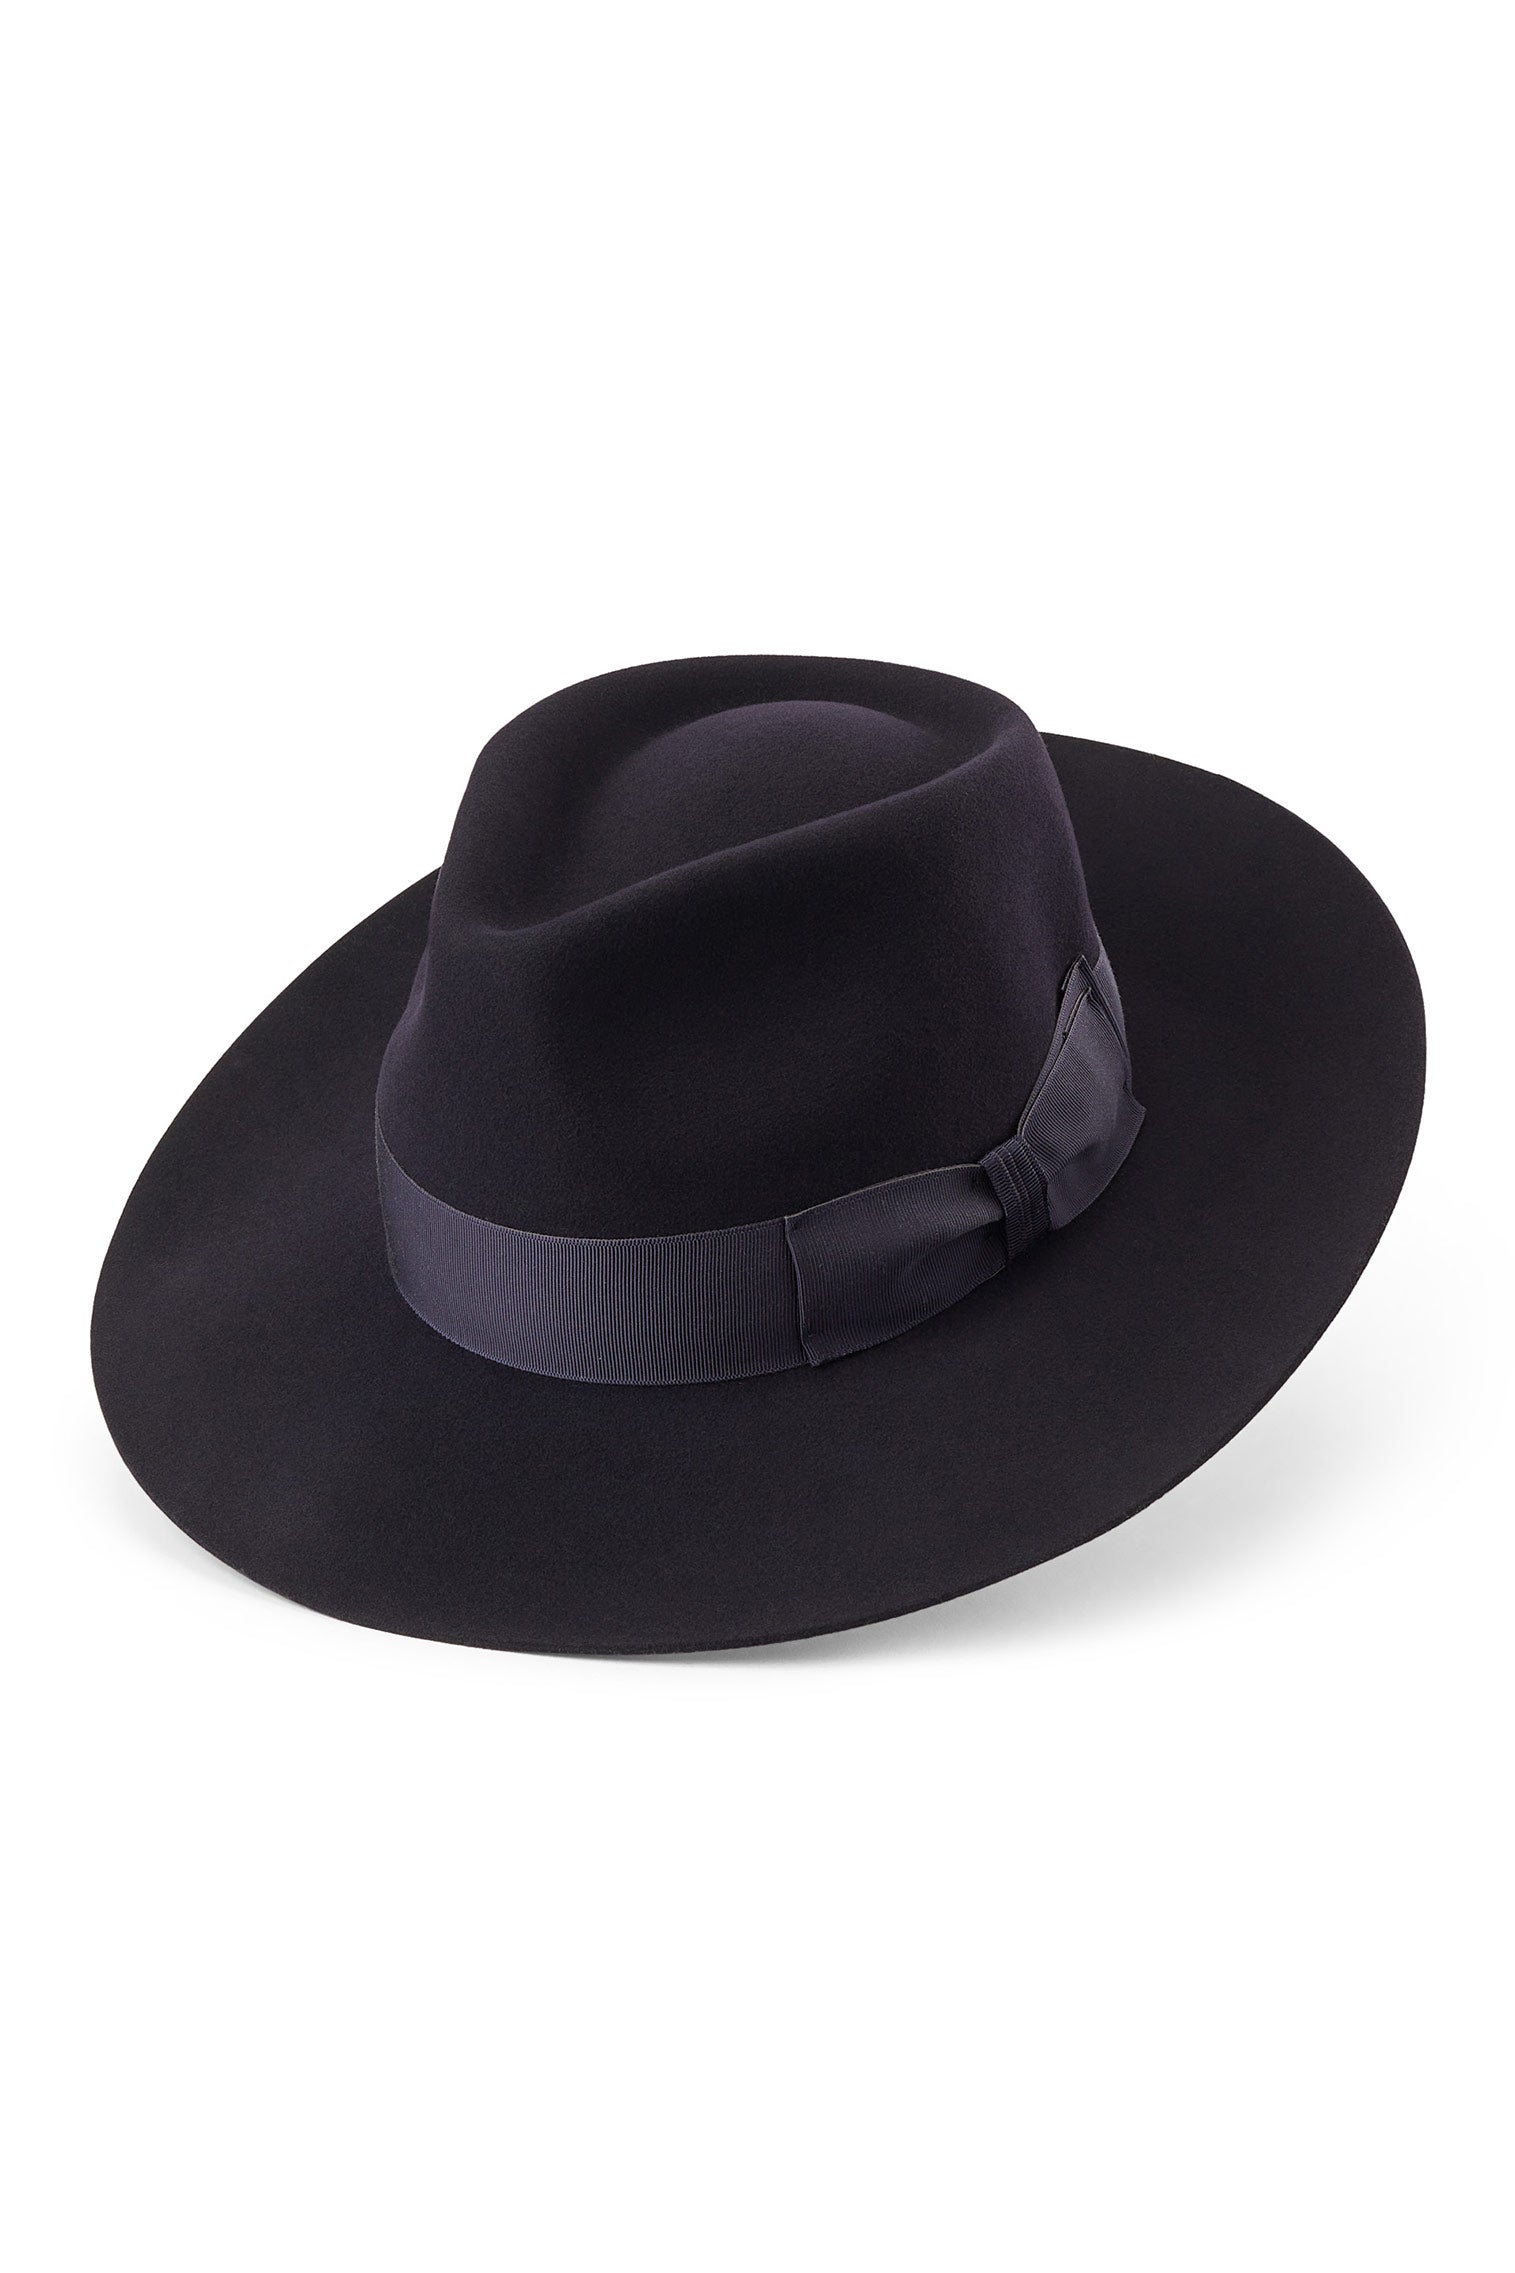 Escorial Wool Stafford Fedora - Hats for Long Face Shapes - Lock & Co. Hatters London UK